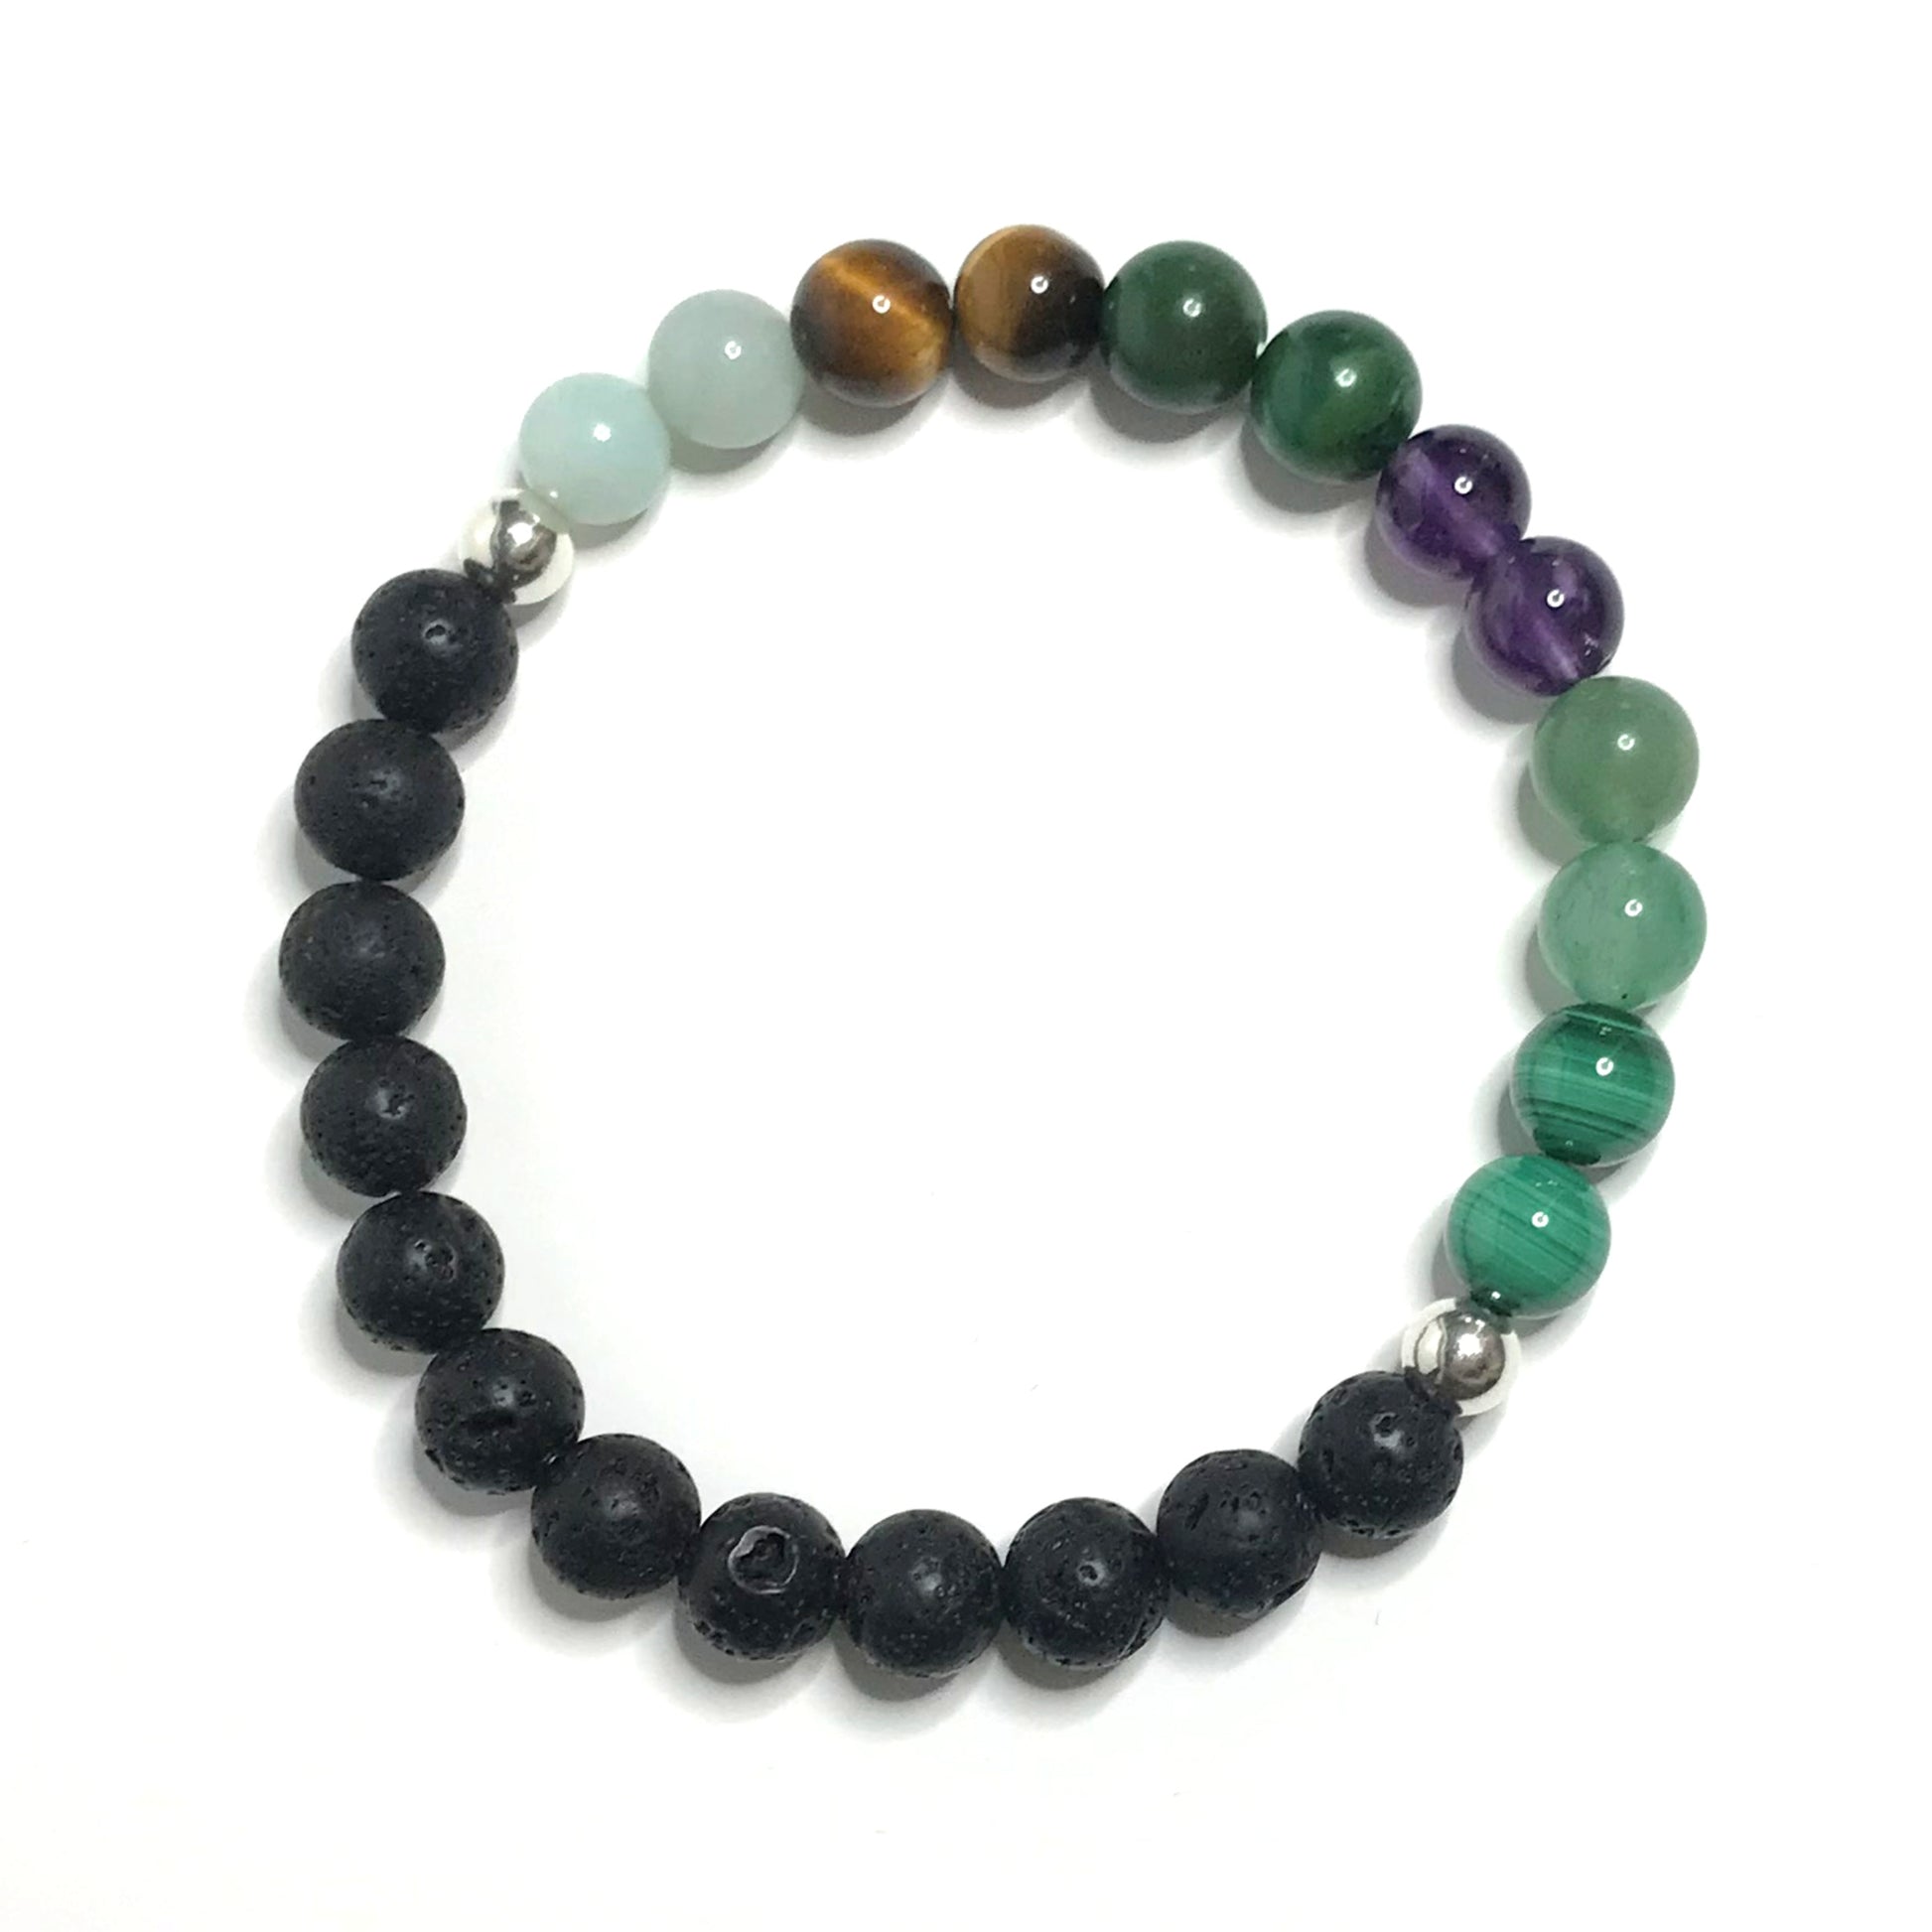 Luck crystal bracelet with lava